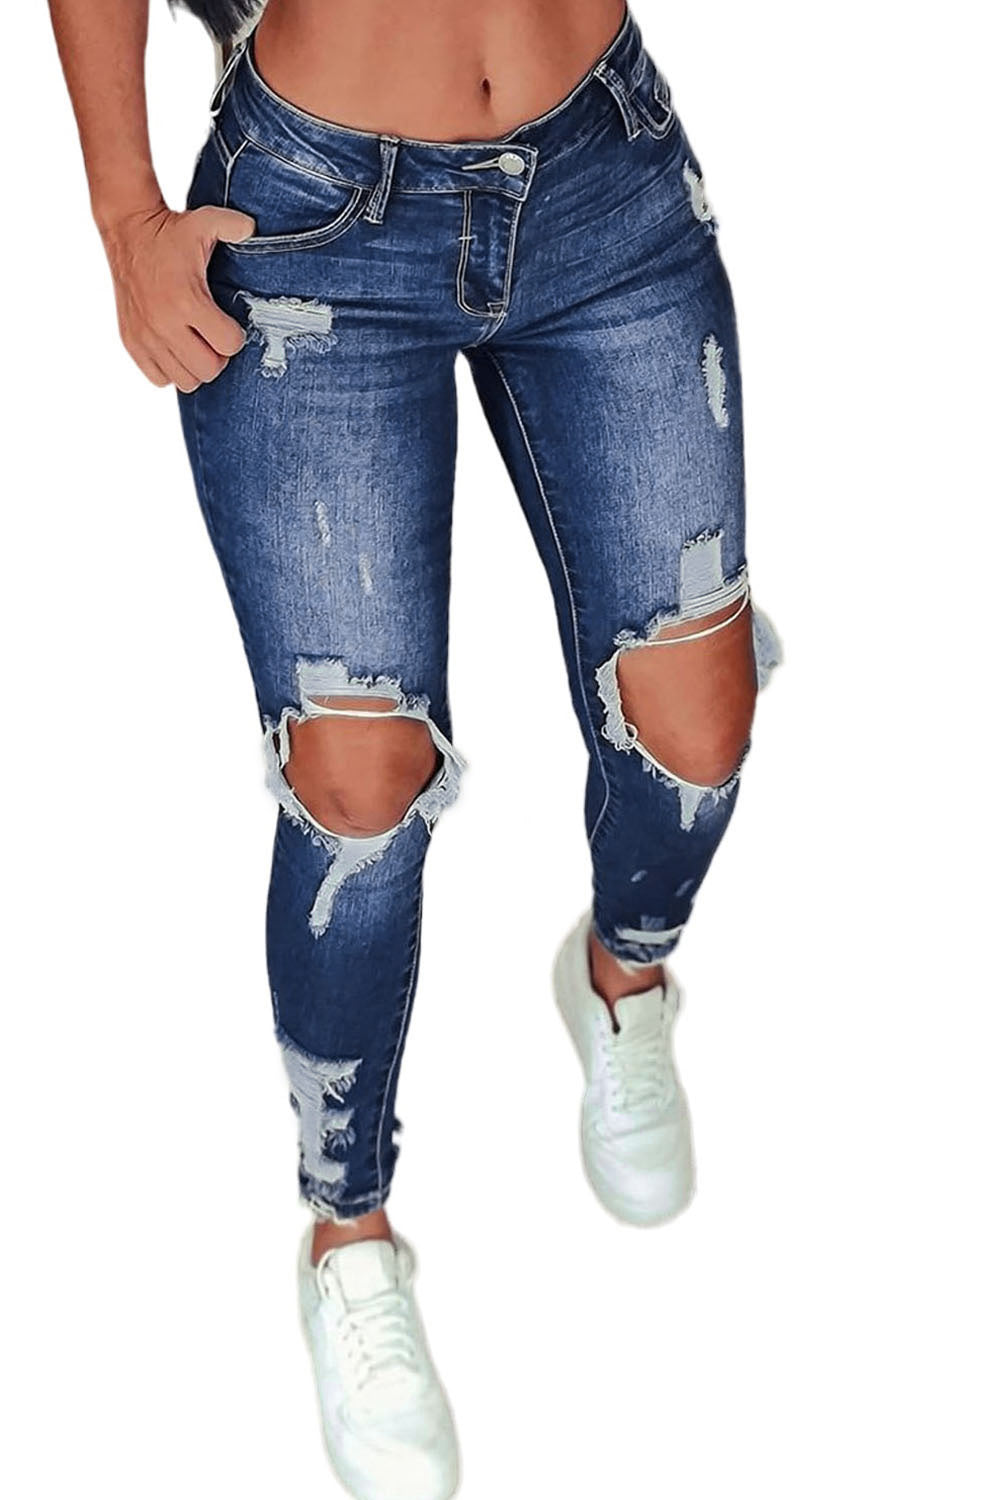 Distressed Low Rise Skinny Pants Ripped Holes Jeans Womens